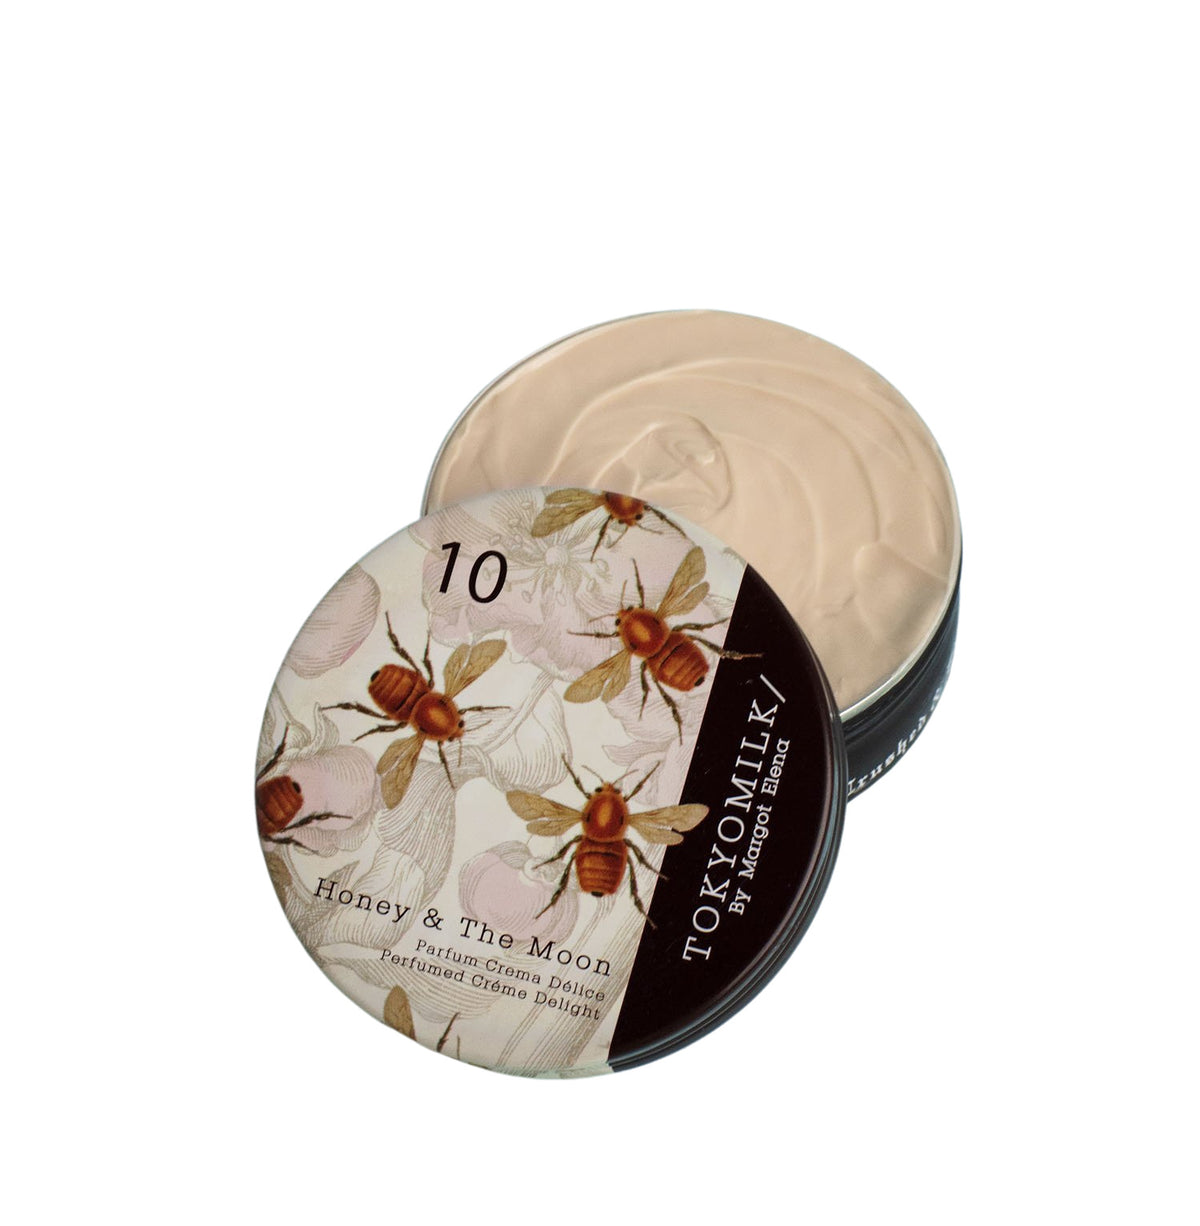 A round container of Margot Elena's TokyoMilk Honey & The Moon No. 10 Parfum Crema with a floral design on the lid, partially open to reveal a cream product inside.